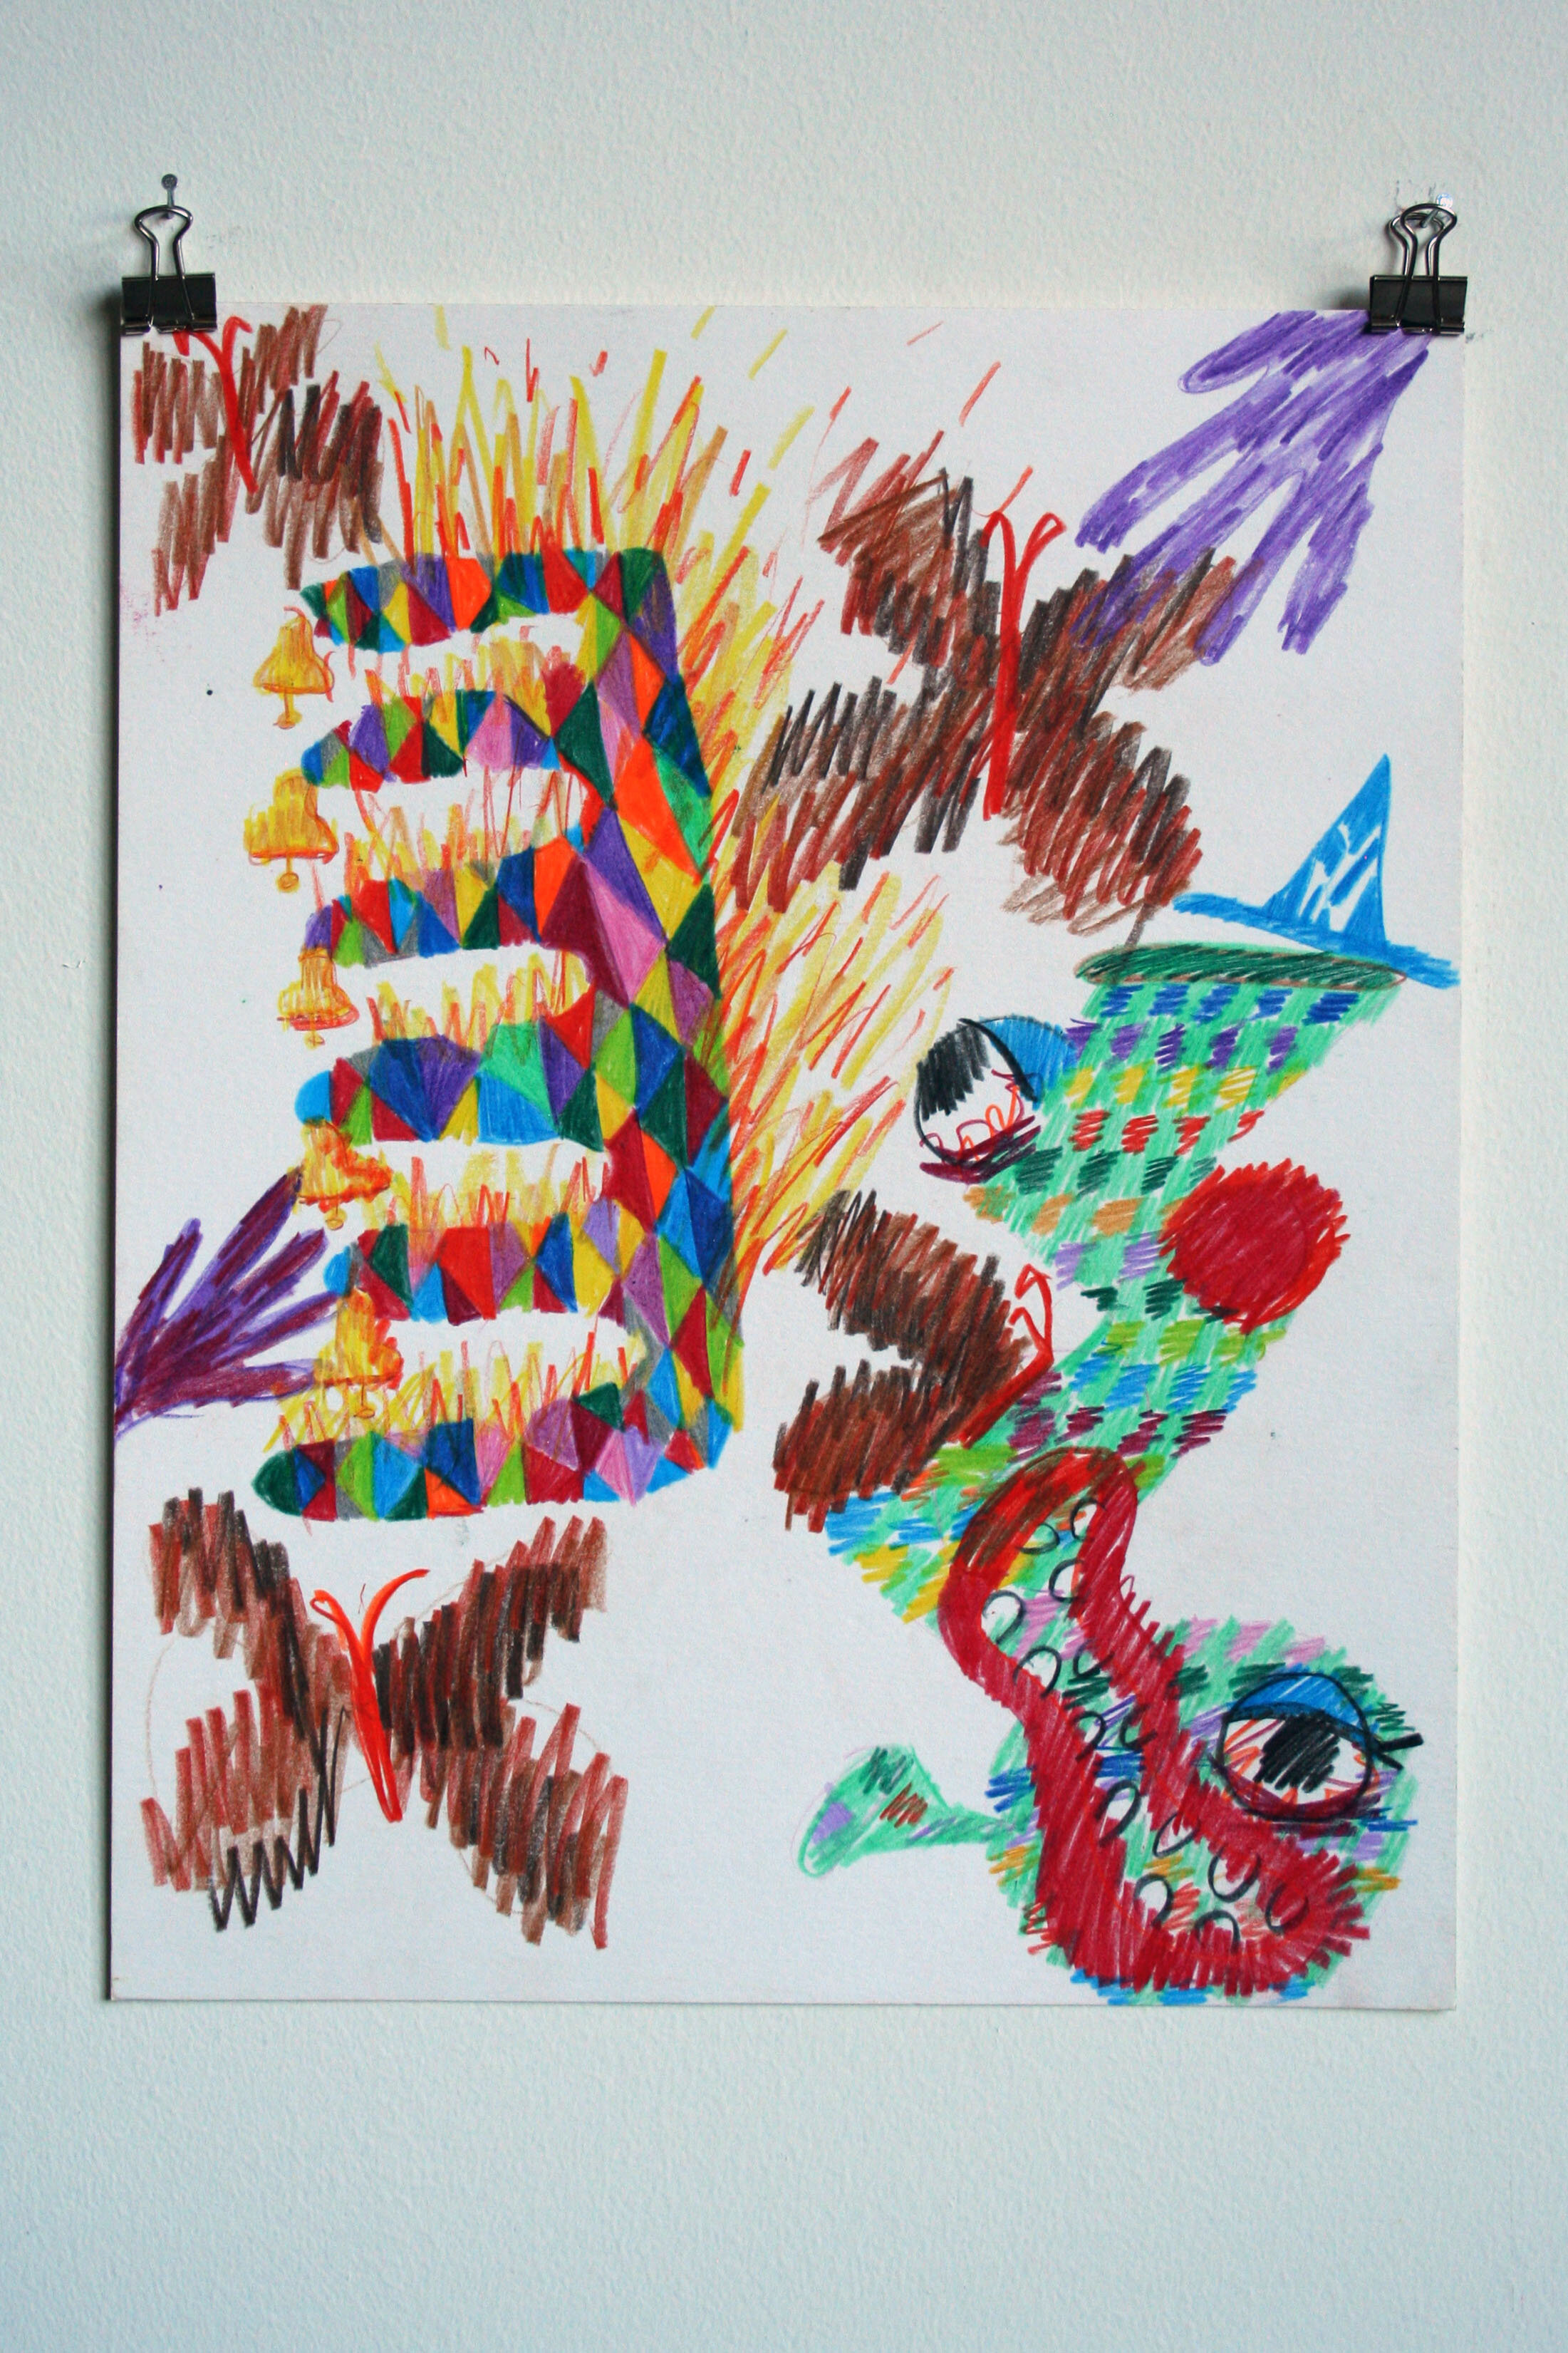   The Jester Comb with Bells Burned and the Basket Bong Juss Laffed N’ Watched,  2013  11 x 14 inches (27.94 x 35.56 cm.)  Colored pencil on paper 